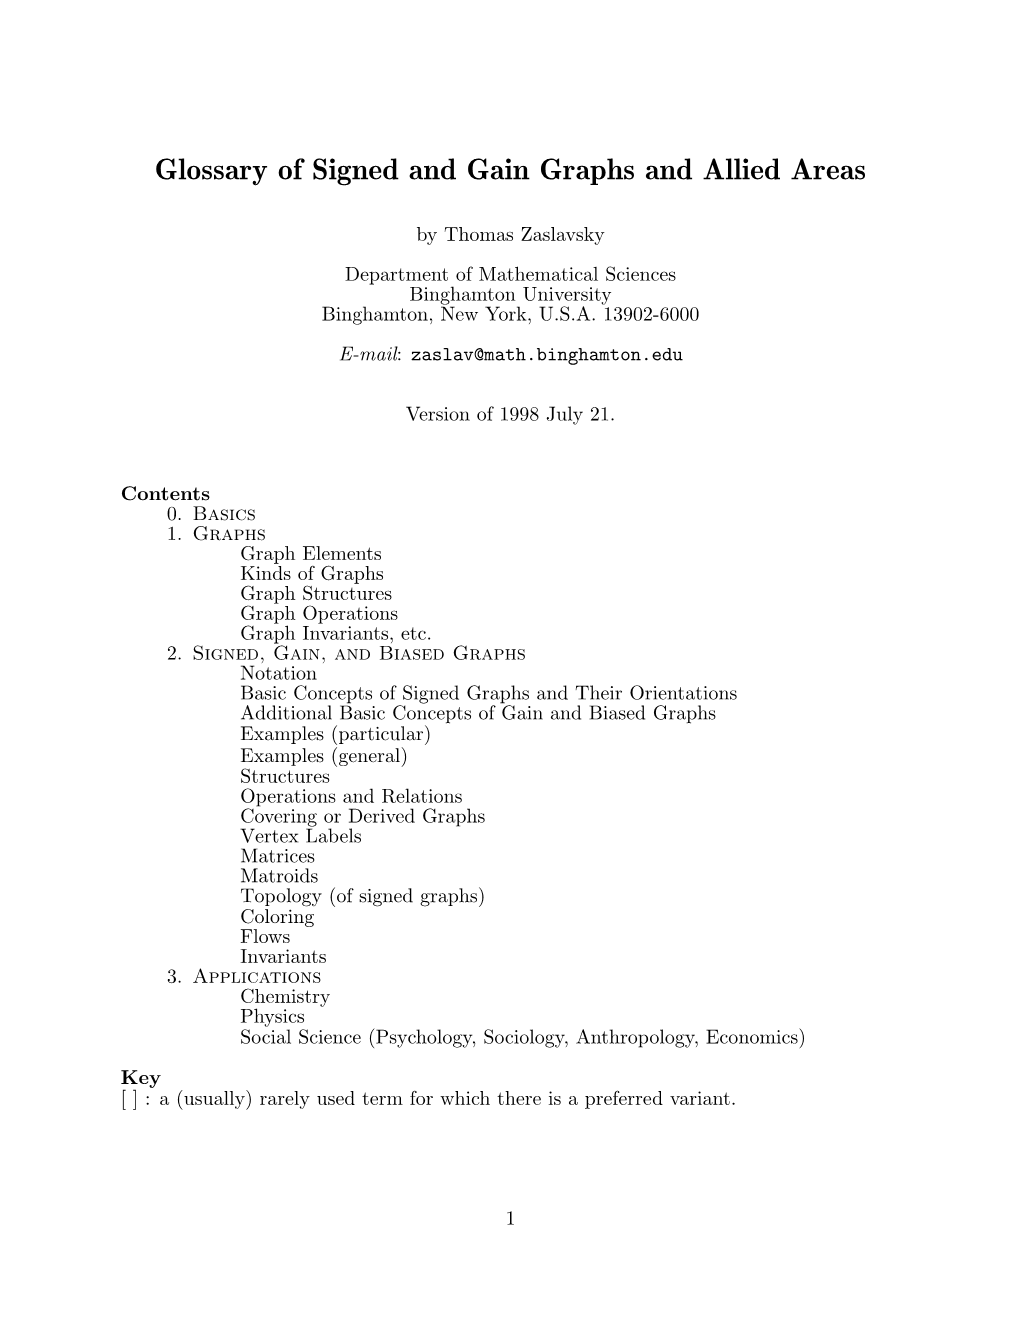 Glossary of Signed and Gain Graphs and Allied Areas